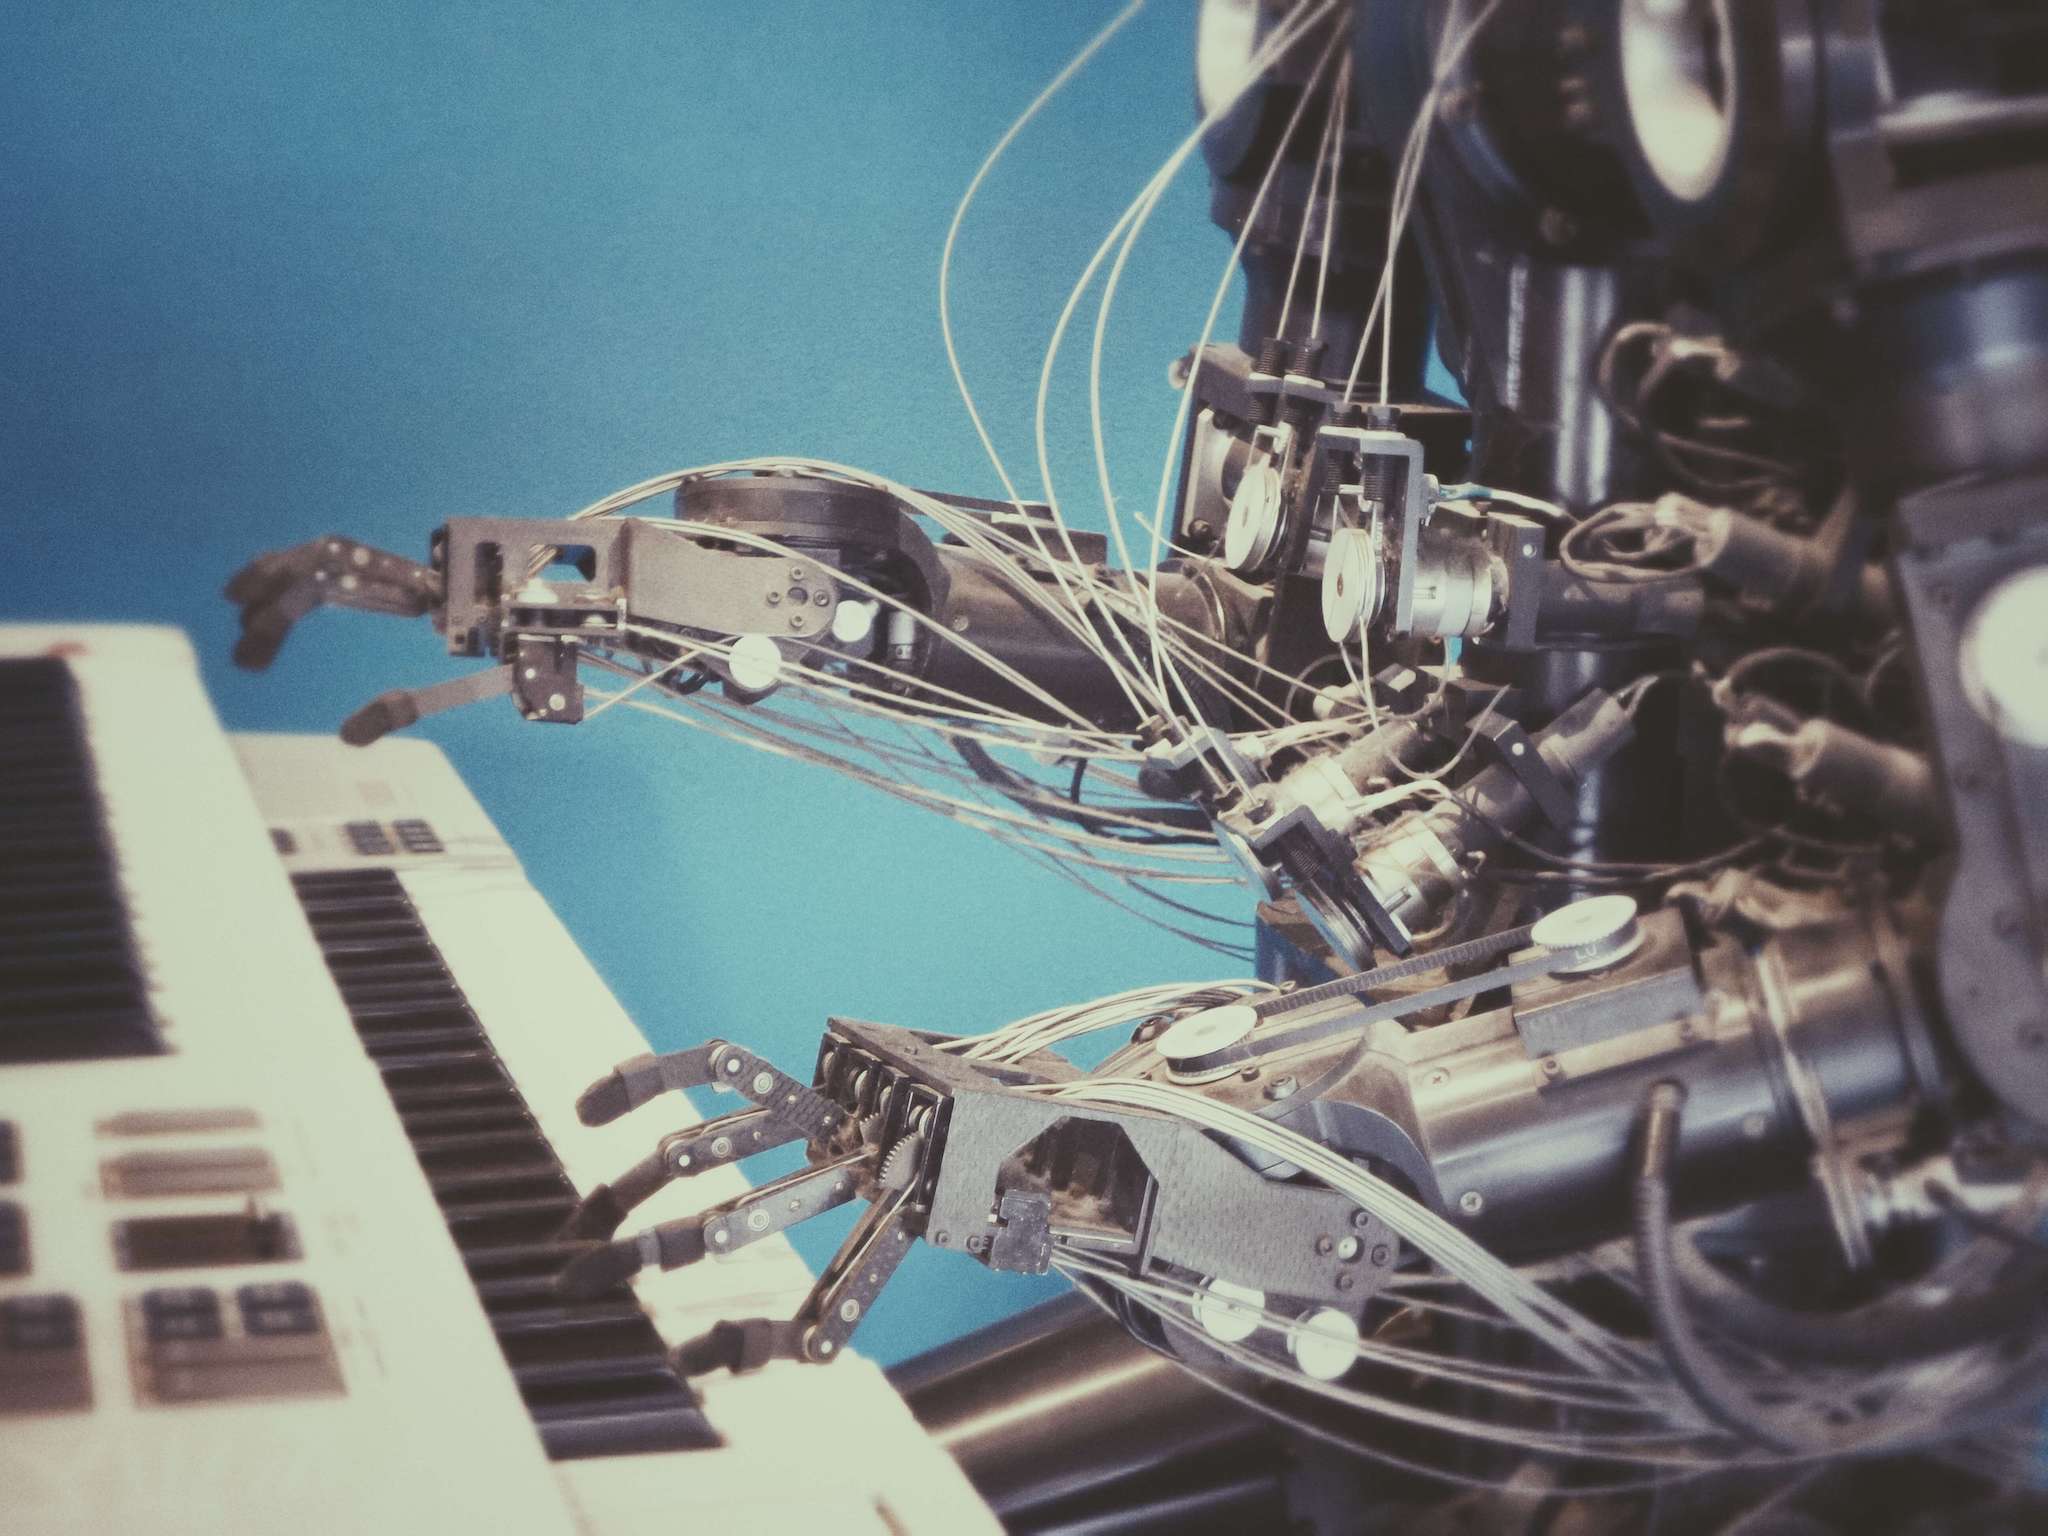 A robot sitting at a keyboard and playing it